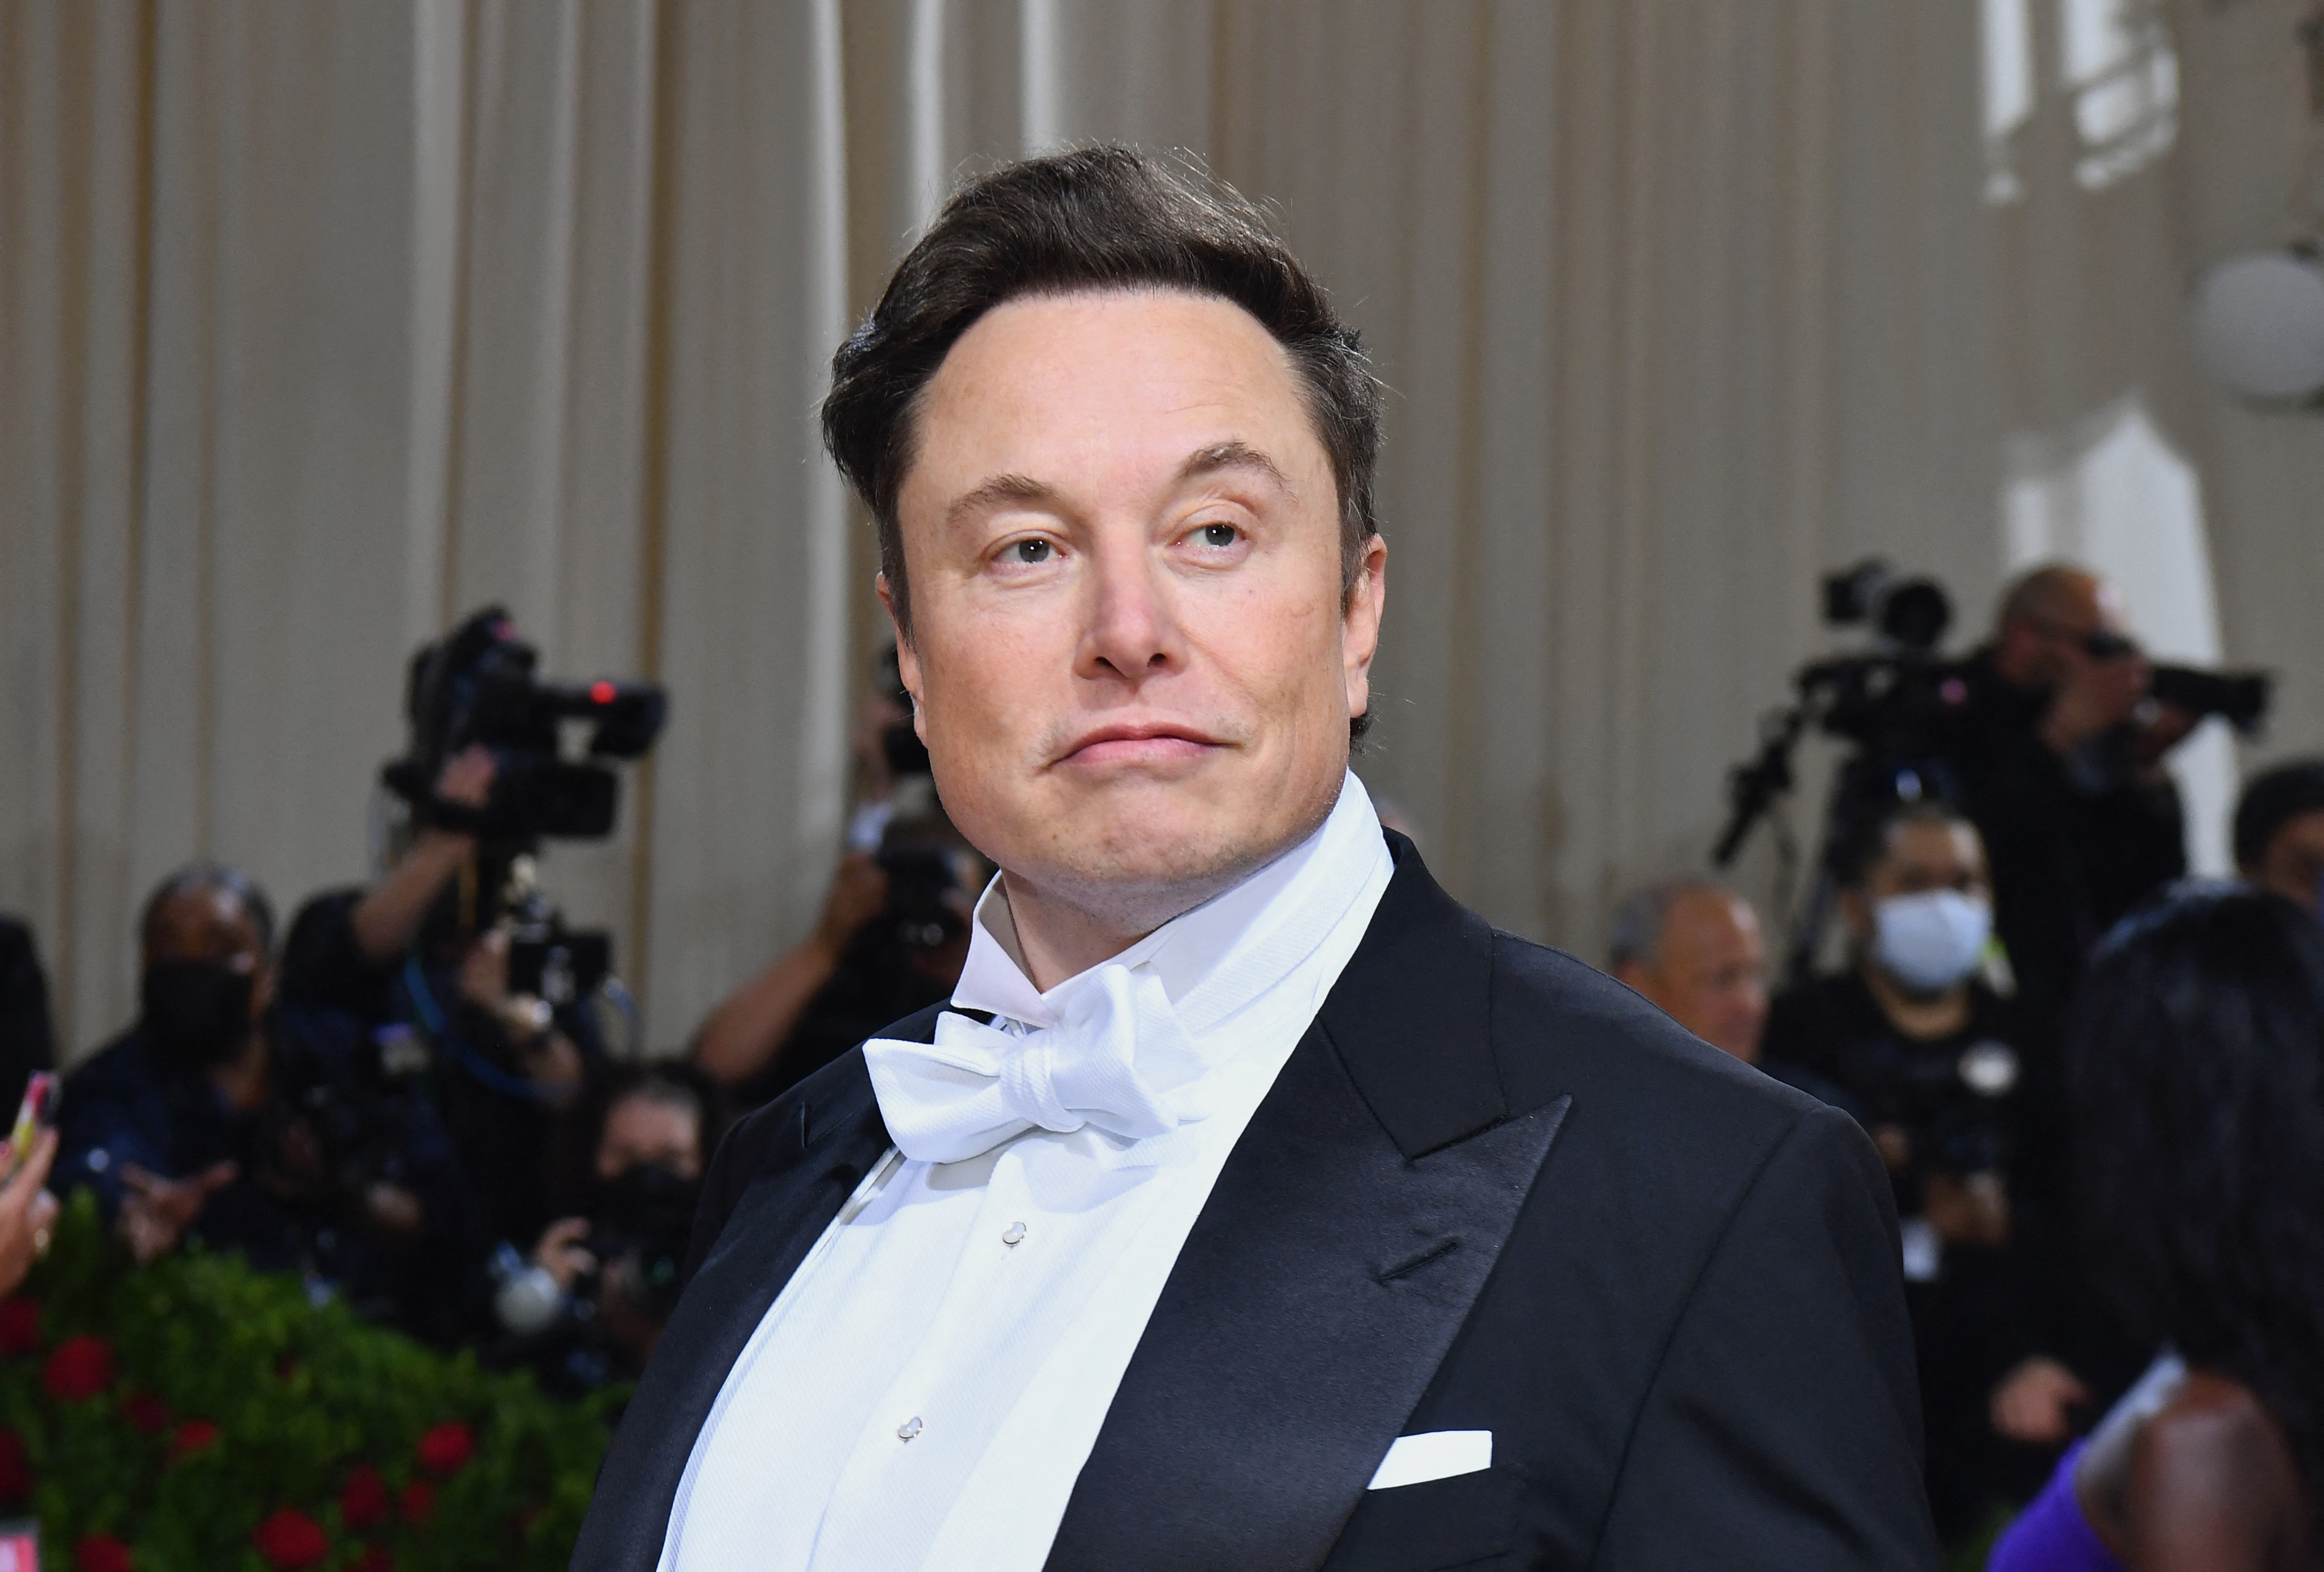 Musk decided to scandalize Apple: What is it this time?